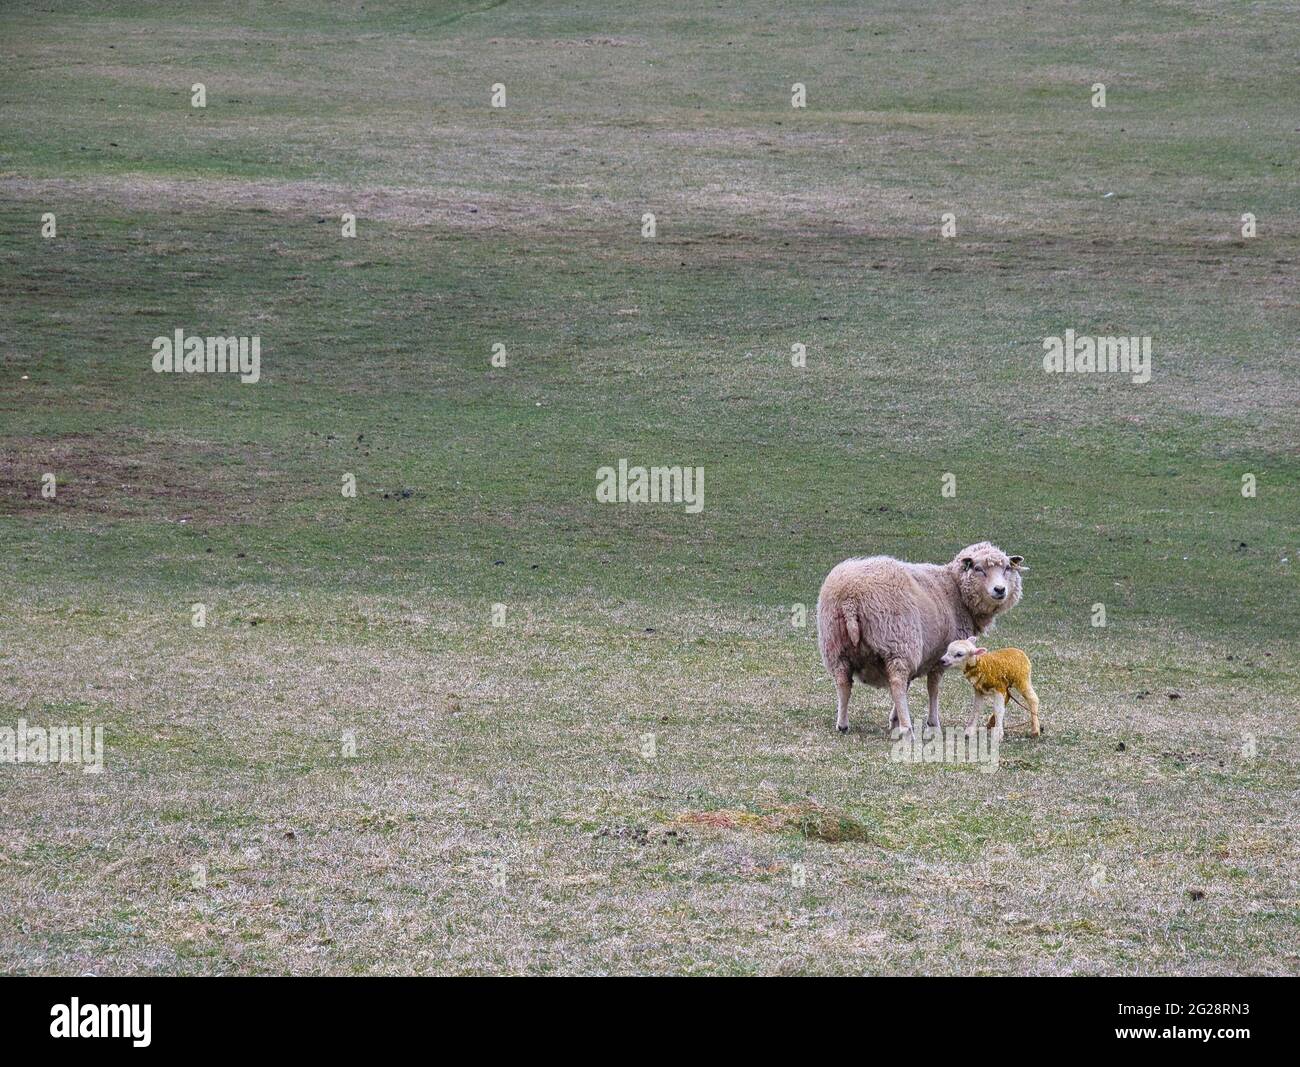 A ewe and new born lamb stained yellow with meconium in a remote field - taken in a remote area of open grazing around Westerwick in Shetland Stock Photo